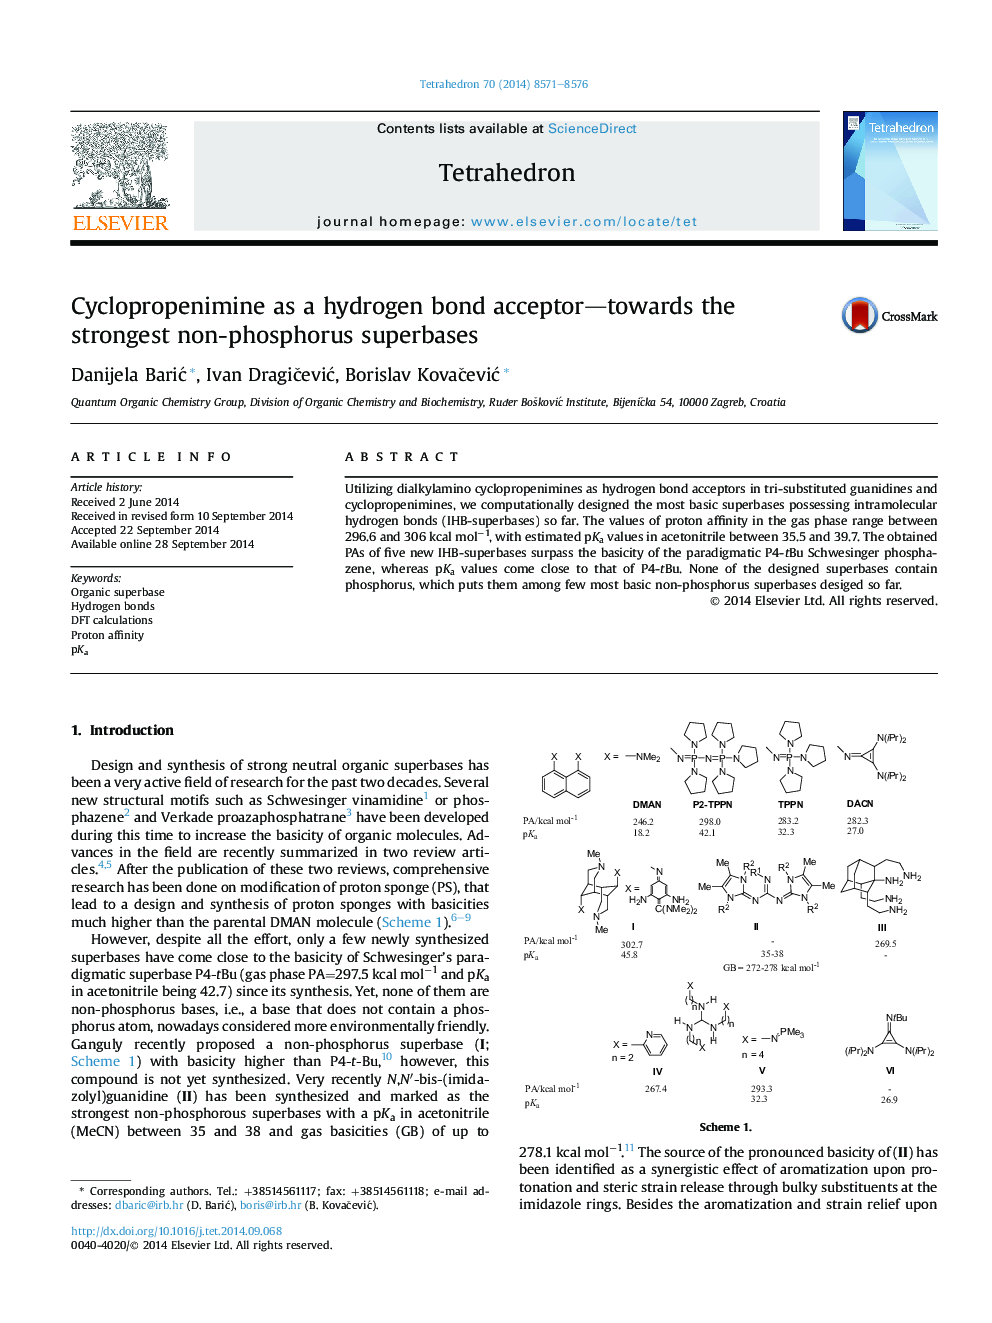 Cyclopropenimine as a hydrogen bond acceptor-towards the strongest non-phosphorus superbases